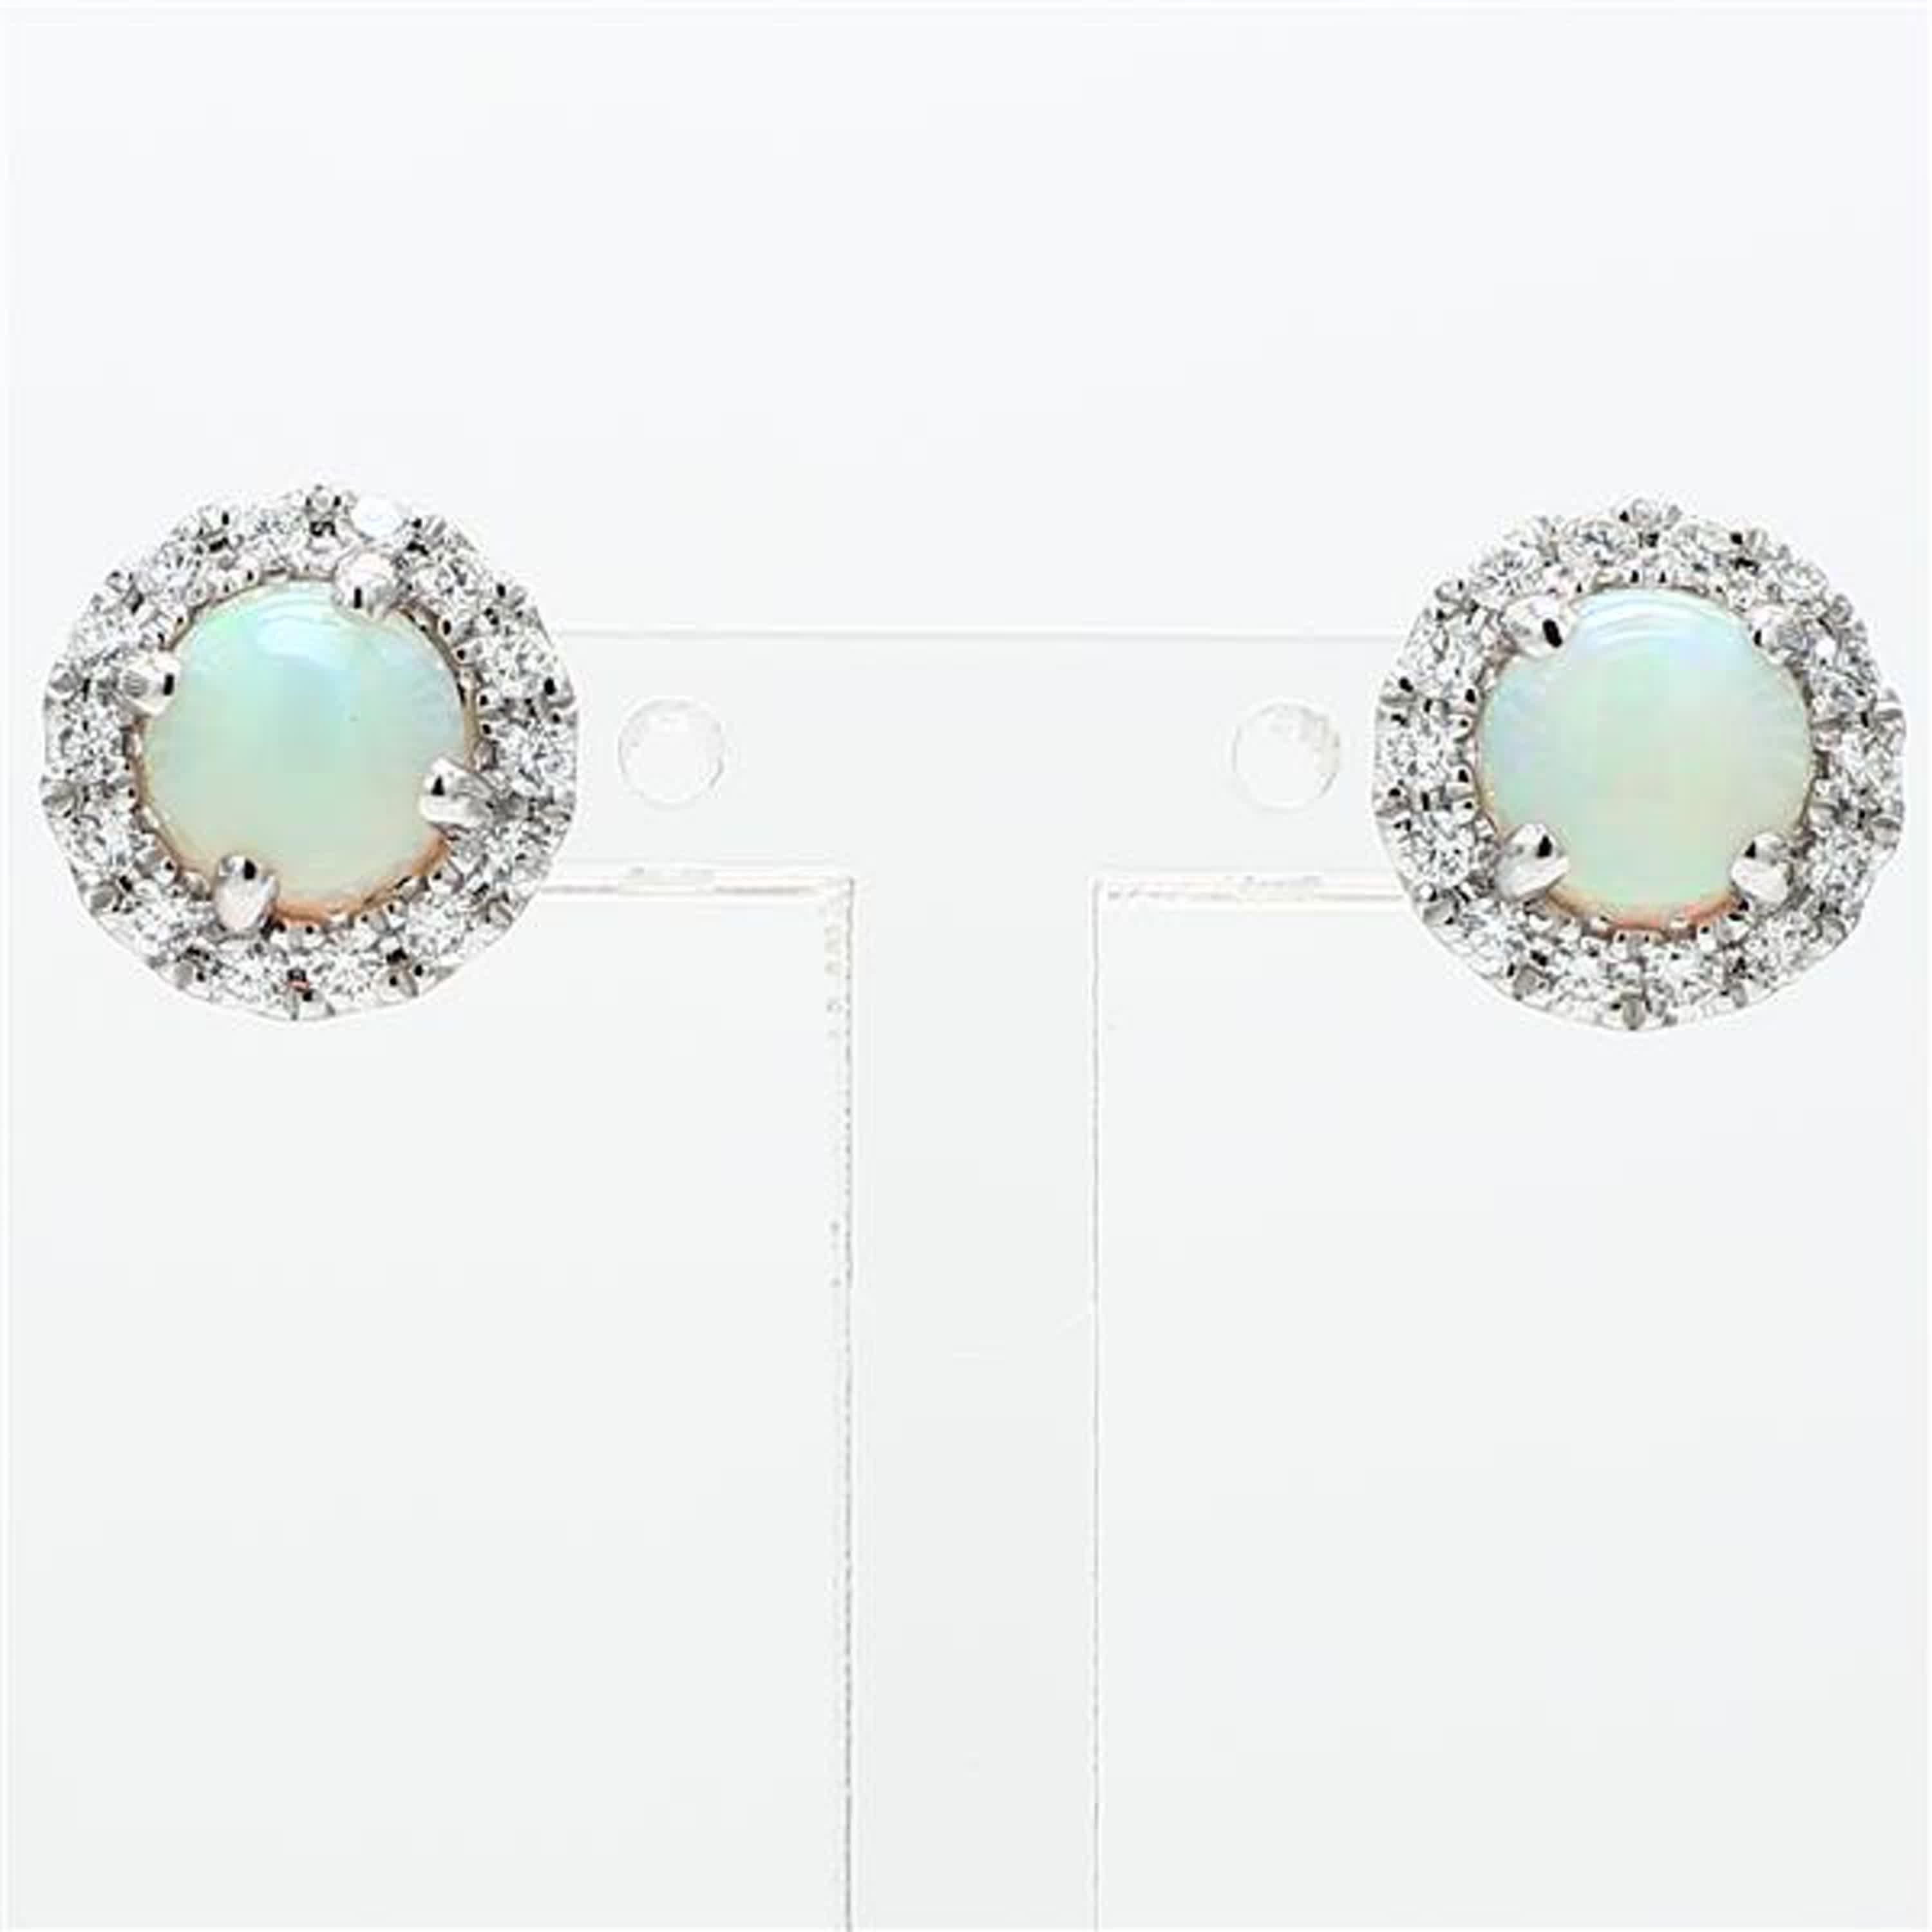 RareGemWorld's classic opal earrings. Mounted in a beautiful 14K White Gold setting with natural round cut opal's. The opal's are surrounded by natural round white diamond melee in a beautiful single halo. These earrings are guaranteed to impress